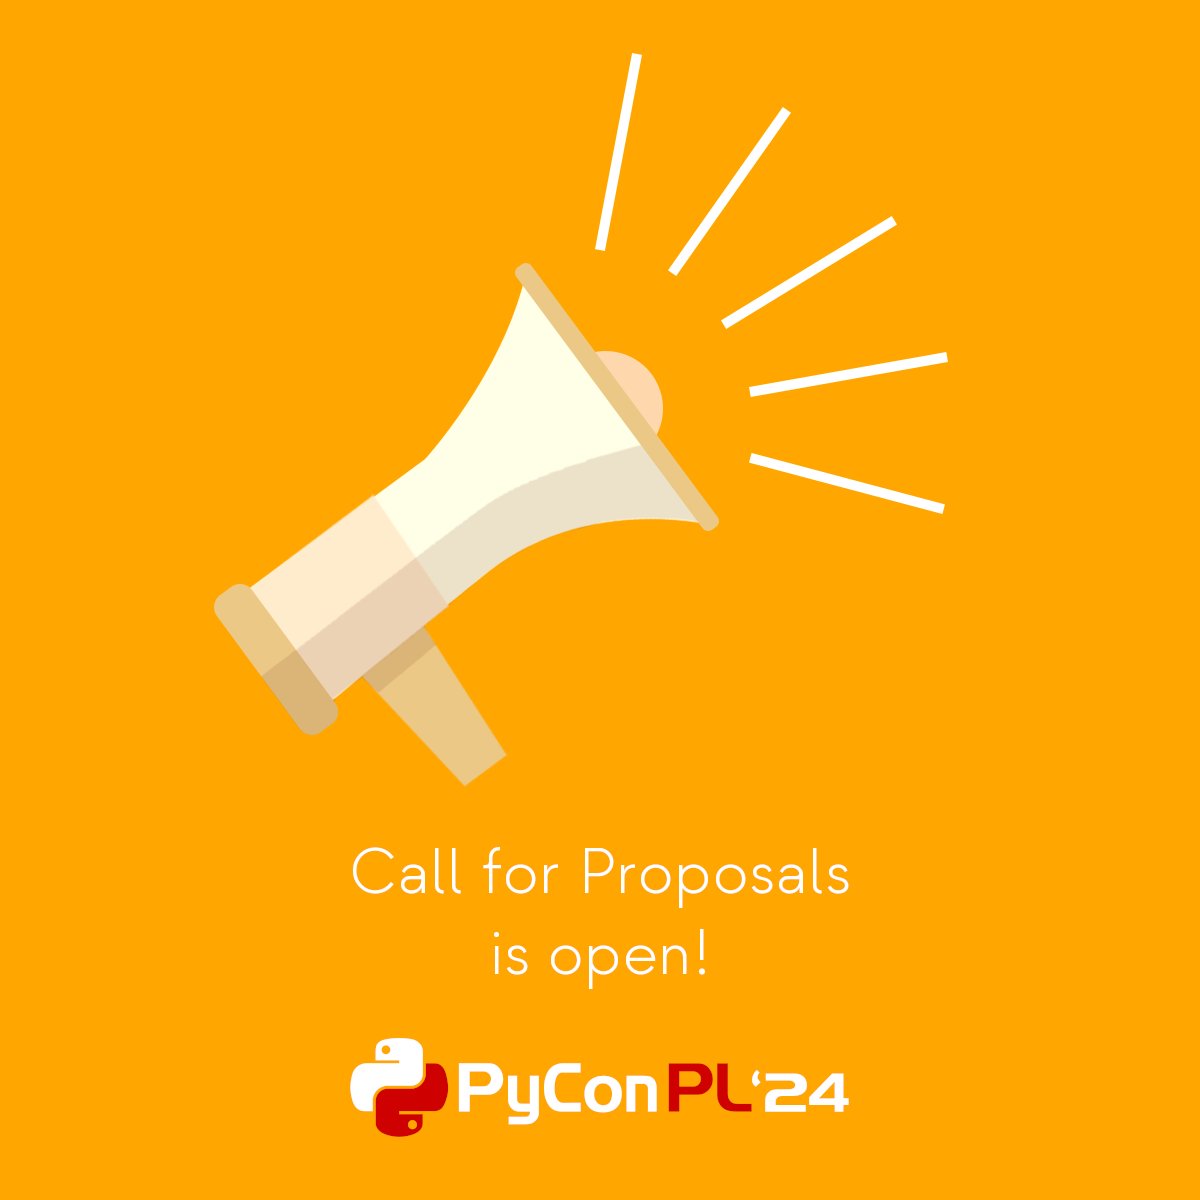 Hey there! 🐍 Call for Proposals for PyCon PL 2024 has opened this week! Submit your Python-related proposals by May 8th. This year's conference is happening in Gliwice from Aug 29 to Sep 1. More details: pl.pycon.org/2024/en/call-f… #PyConPL2024 #Python #PyCon #Conference